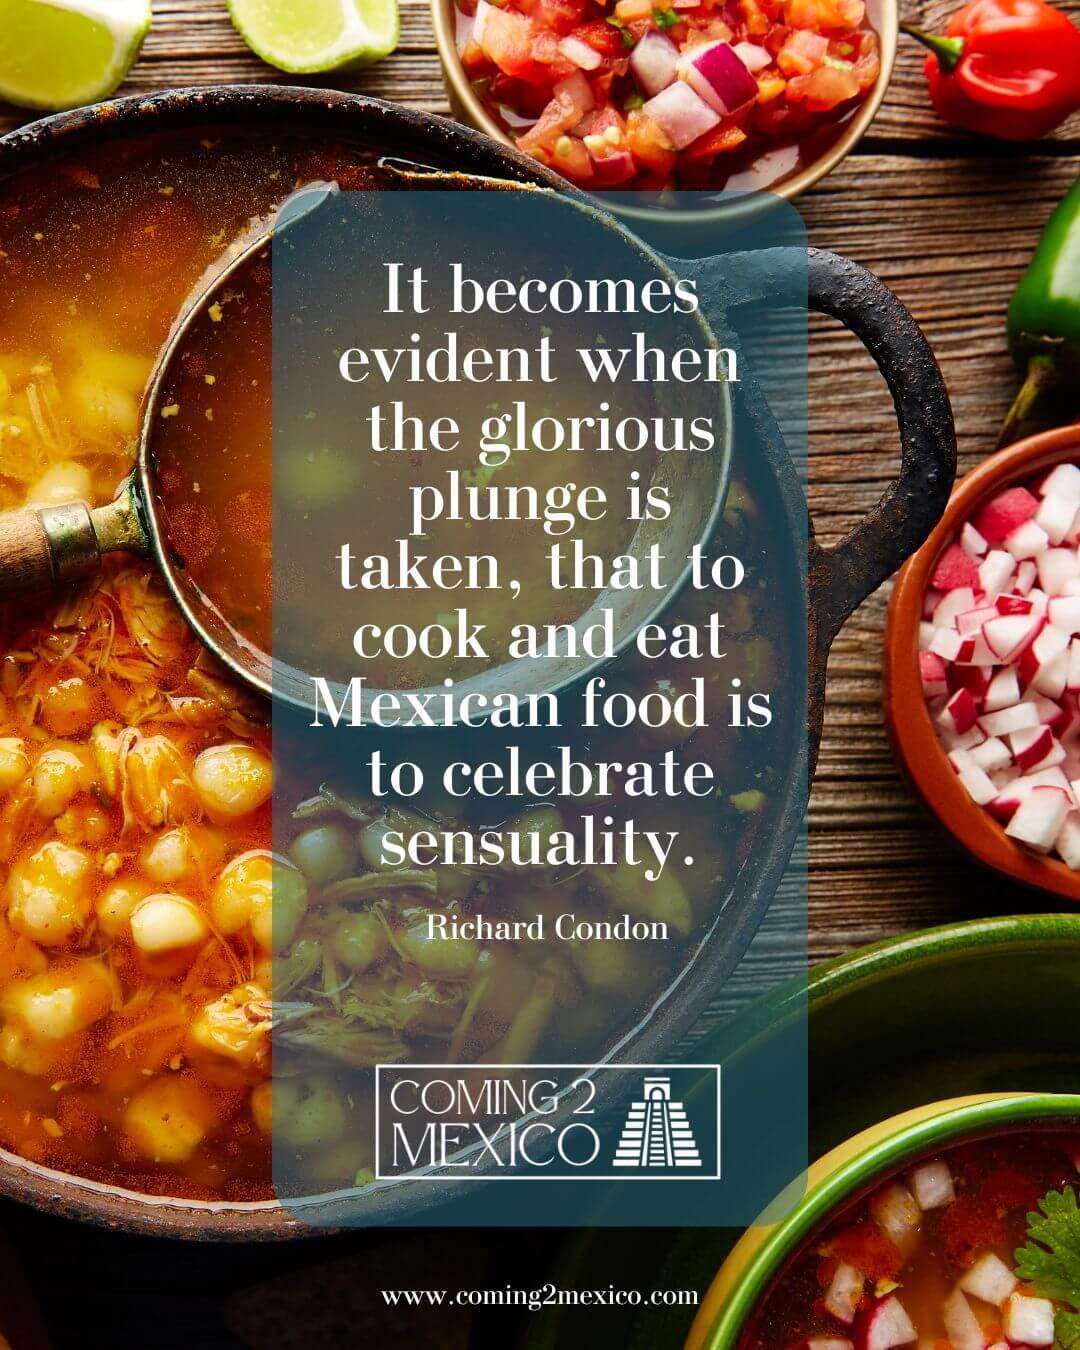 “It becomes evident, when the glorious plunge is taken, that to cook and eat Mexican food is to celebrate sensuality.” - Richard Condon